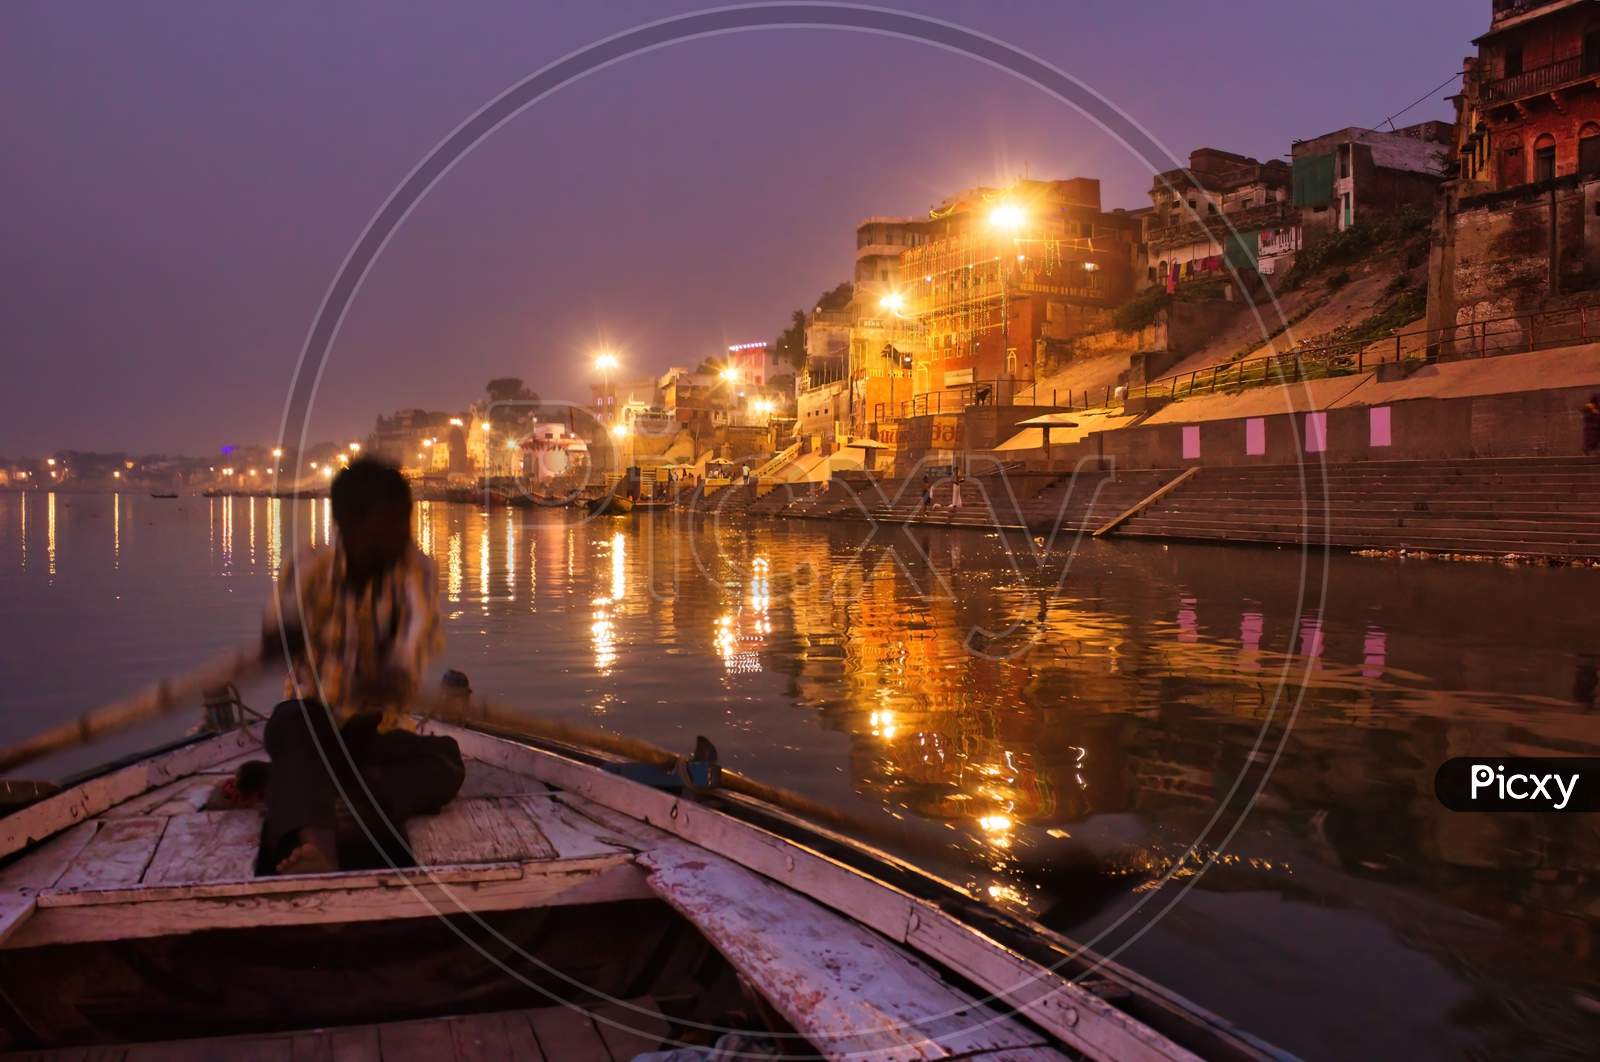 Varanasi, India - November 01, 2016: A Man Rowing A Wooden Paddle On A Boat Before Sunrise In Ganges River Against Illuminated Varanasi Holy City Located In The State Of Uttar Pradesh.